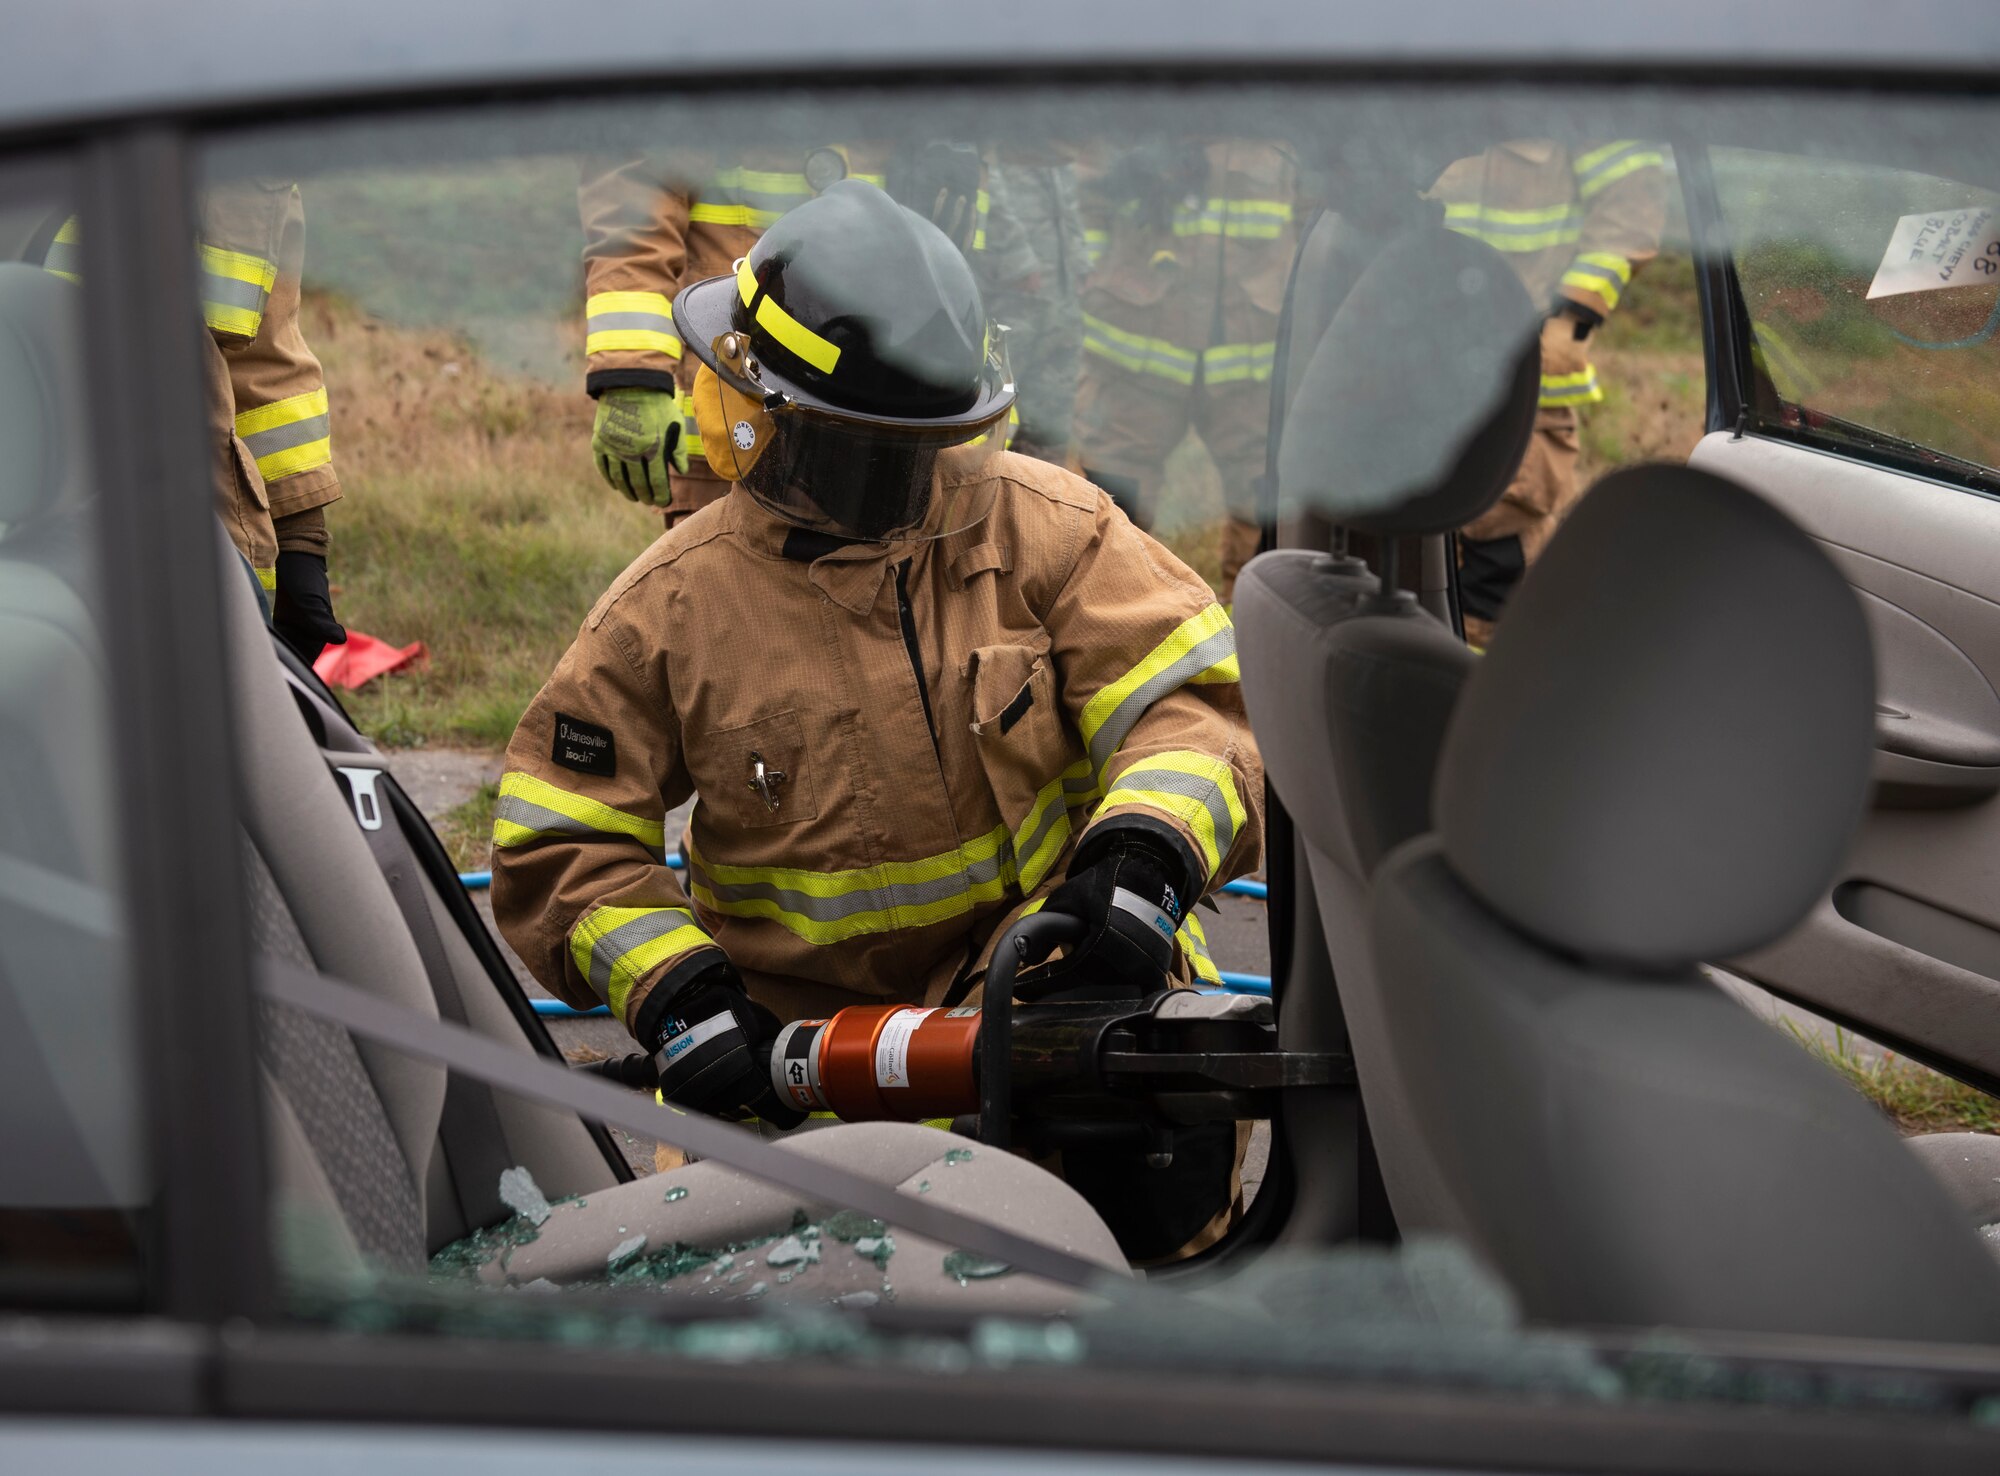 52nd Fighter Wing leadership participate in a vehicle extrication simulation for Fire Prevention Week, Oct. 5, 2020, at Spangdahlem Air Base, Germany. Wing leadership had the opportunity to use tools and simulate rescuing a victim from a vehicle. (U.S. Air Force photo by Senior Airman Melody W. Howley)